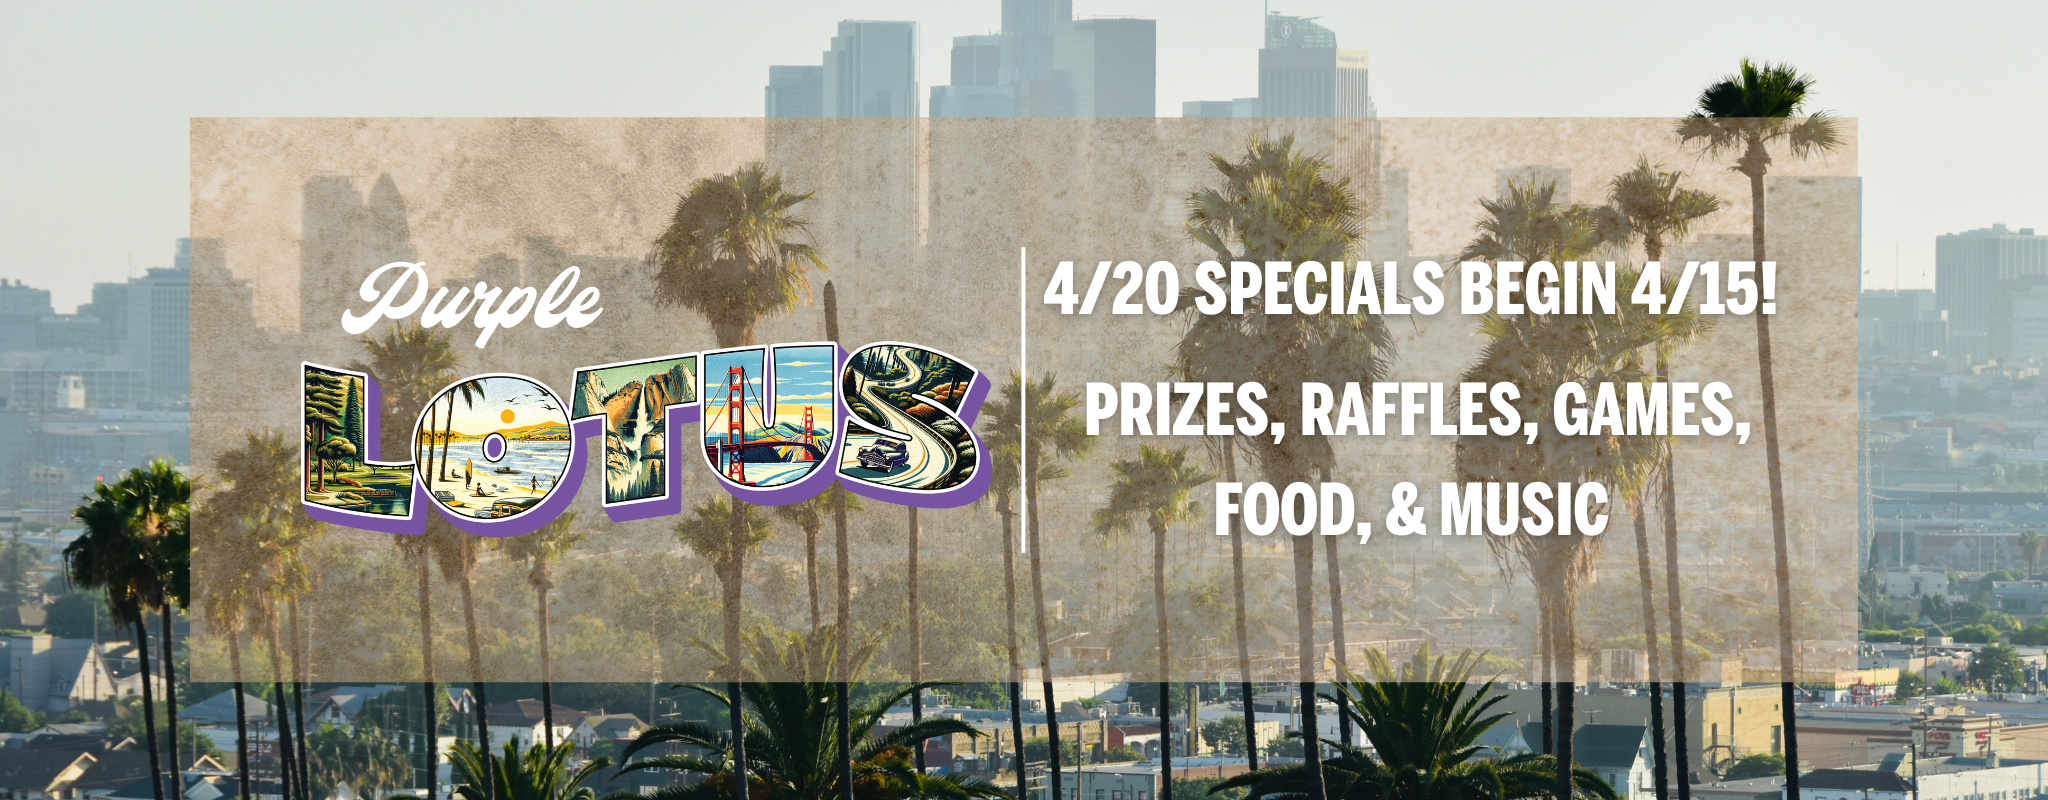 Purple Lotus's 4/20 Bash: Up to 40% off Deals, Prizes, Raffles, Games, Food, & Music!